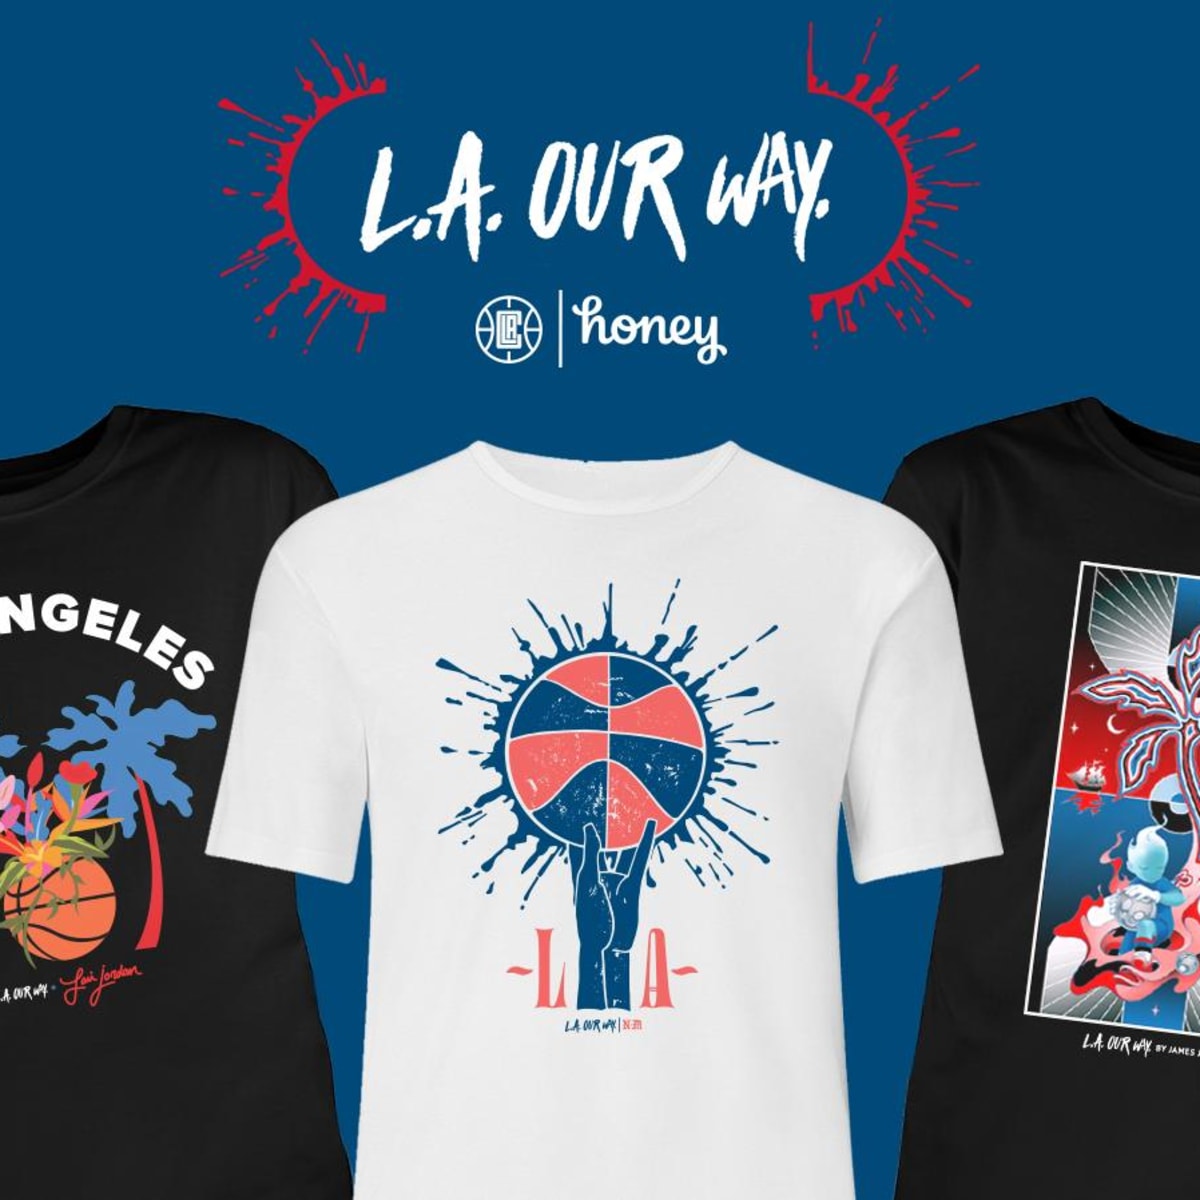 LA Clippers' Expanded Partnership With Honey Will Now Include